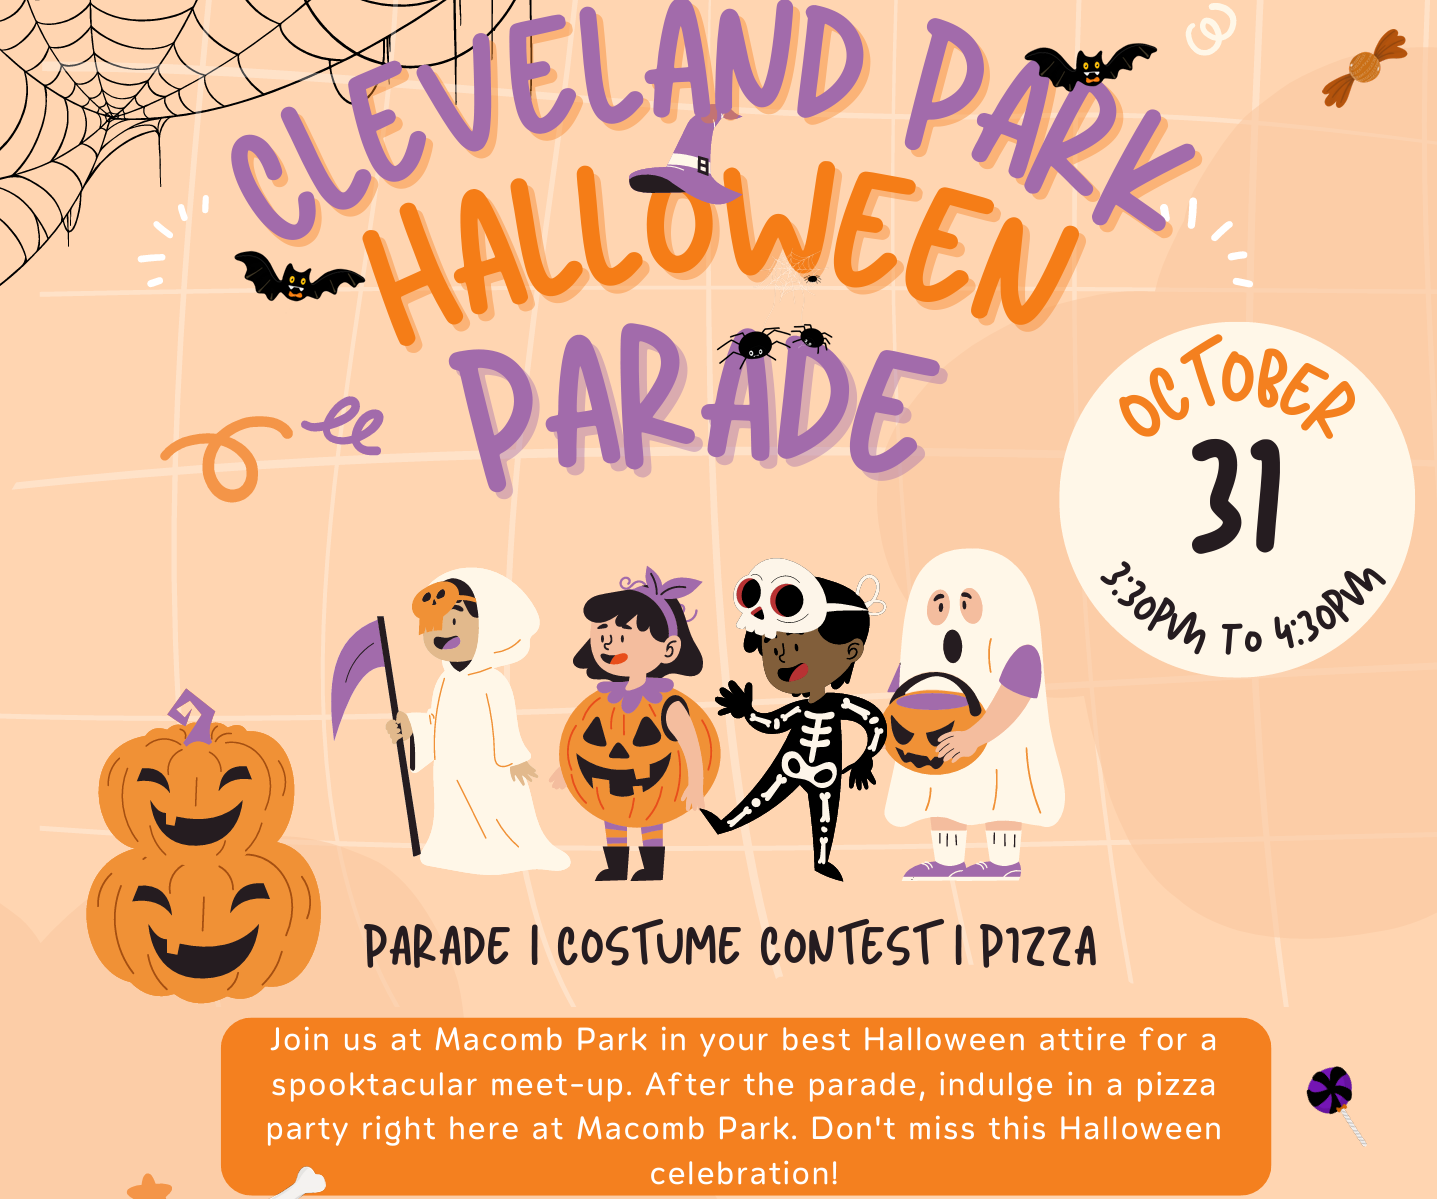 Picture of CPCA flyer showing Cleveland Park Halloween Parade October 31, 3:30pm-4:30pm with a drawing of kids in costumes and pumpkins. Text says: Join us at Macomb Park in your best Halloween attire for a spooktacular meet-up. After the parade, indulge in a pizza party right here at Macomb Park. Don't miss this Halloween celebration!